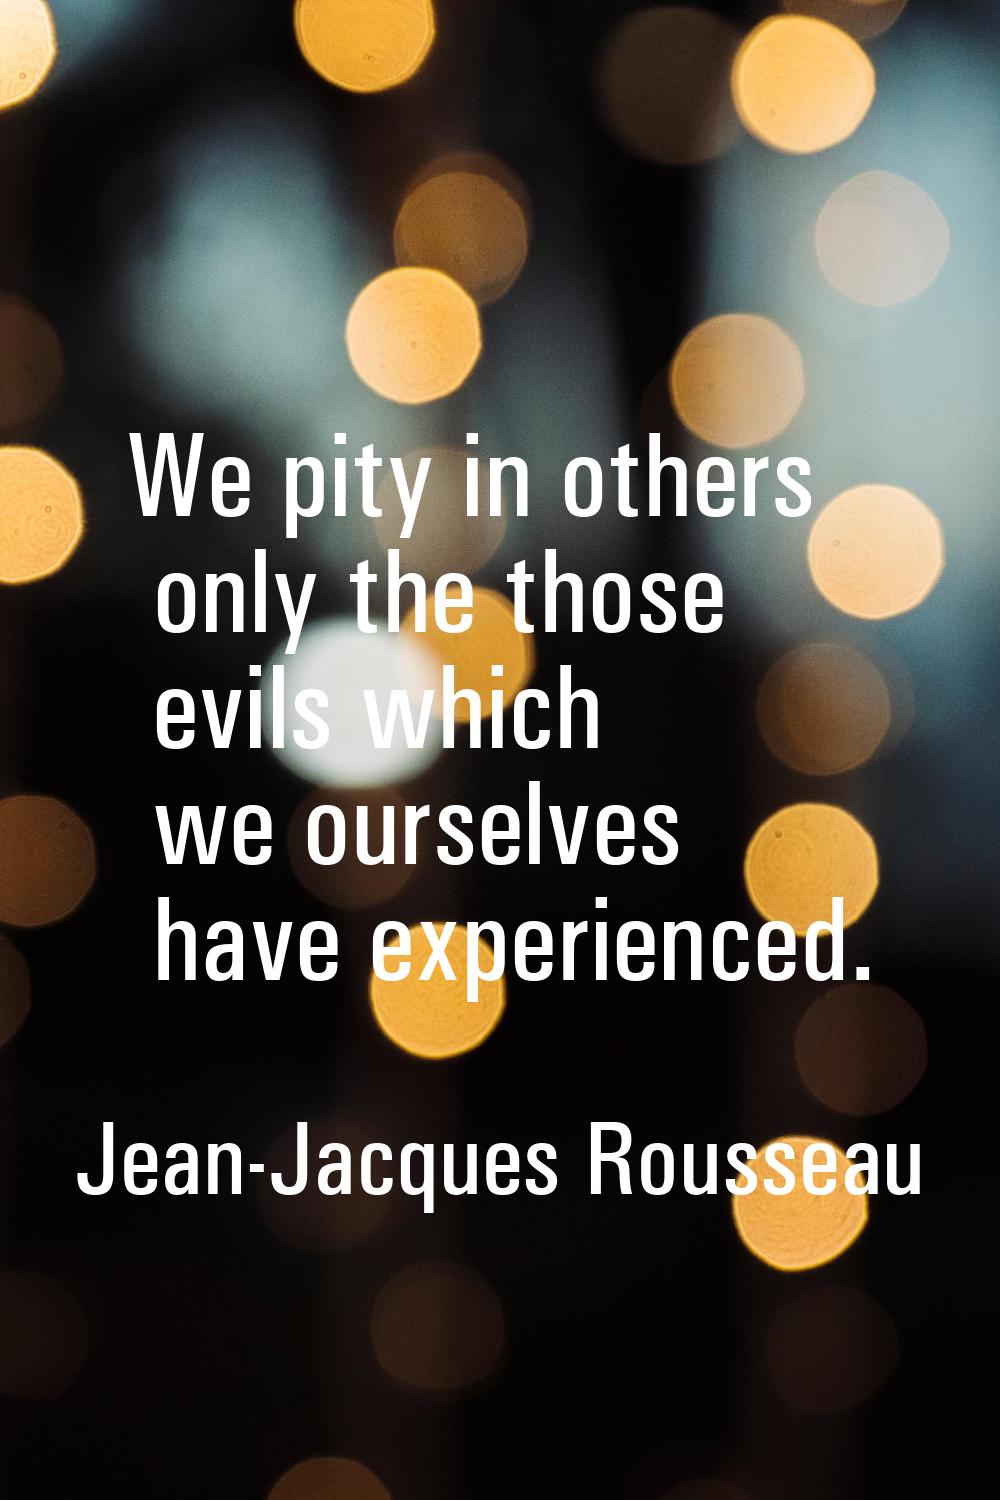 We pity in others only the those evils which we ourselves have experienced.